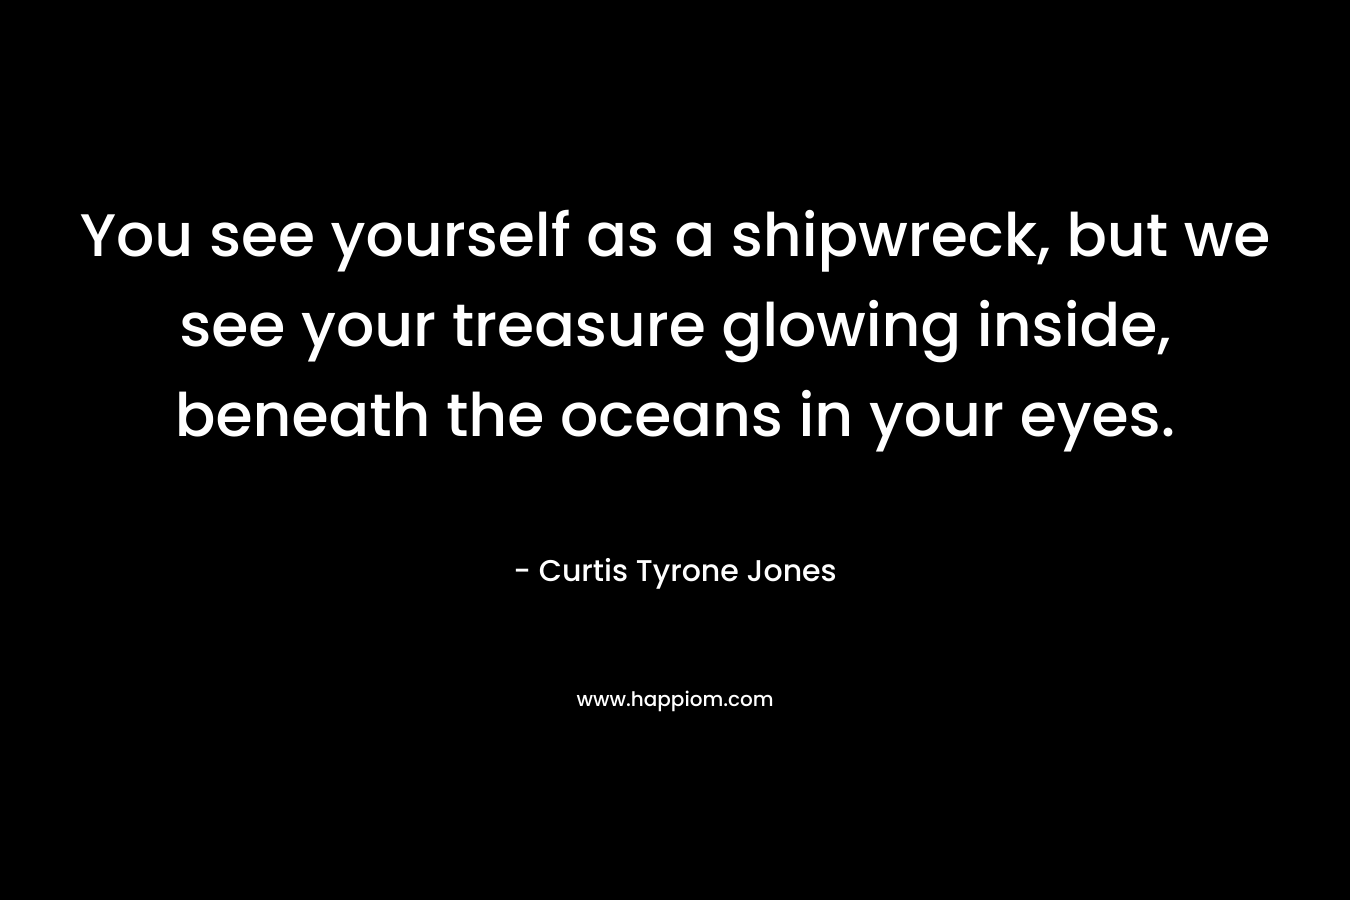 You see yourself as a shipwreck, but we see your treasure glowing inside, beneath the oceans in your eyes. – Curtis Tyrone Jones